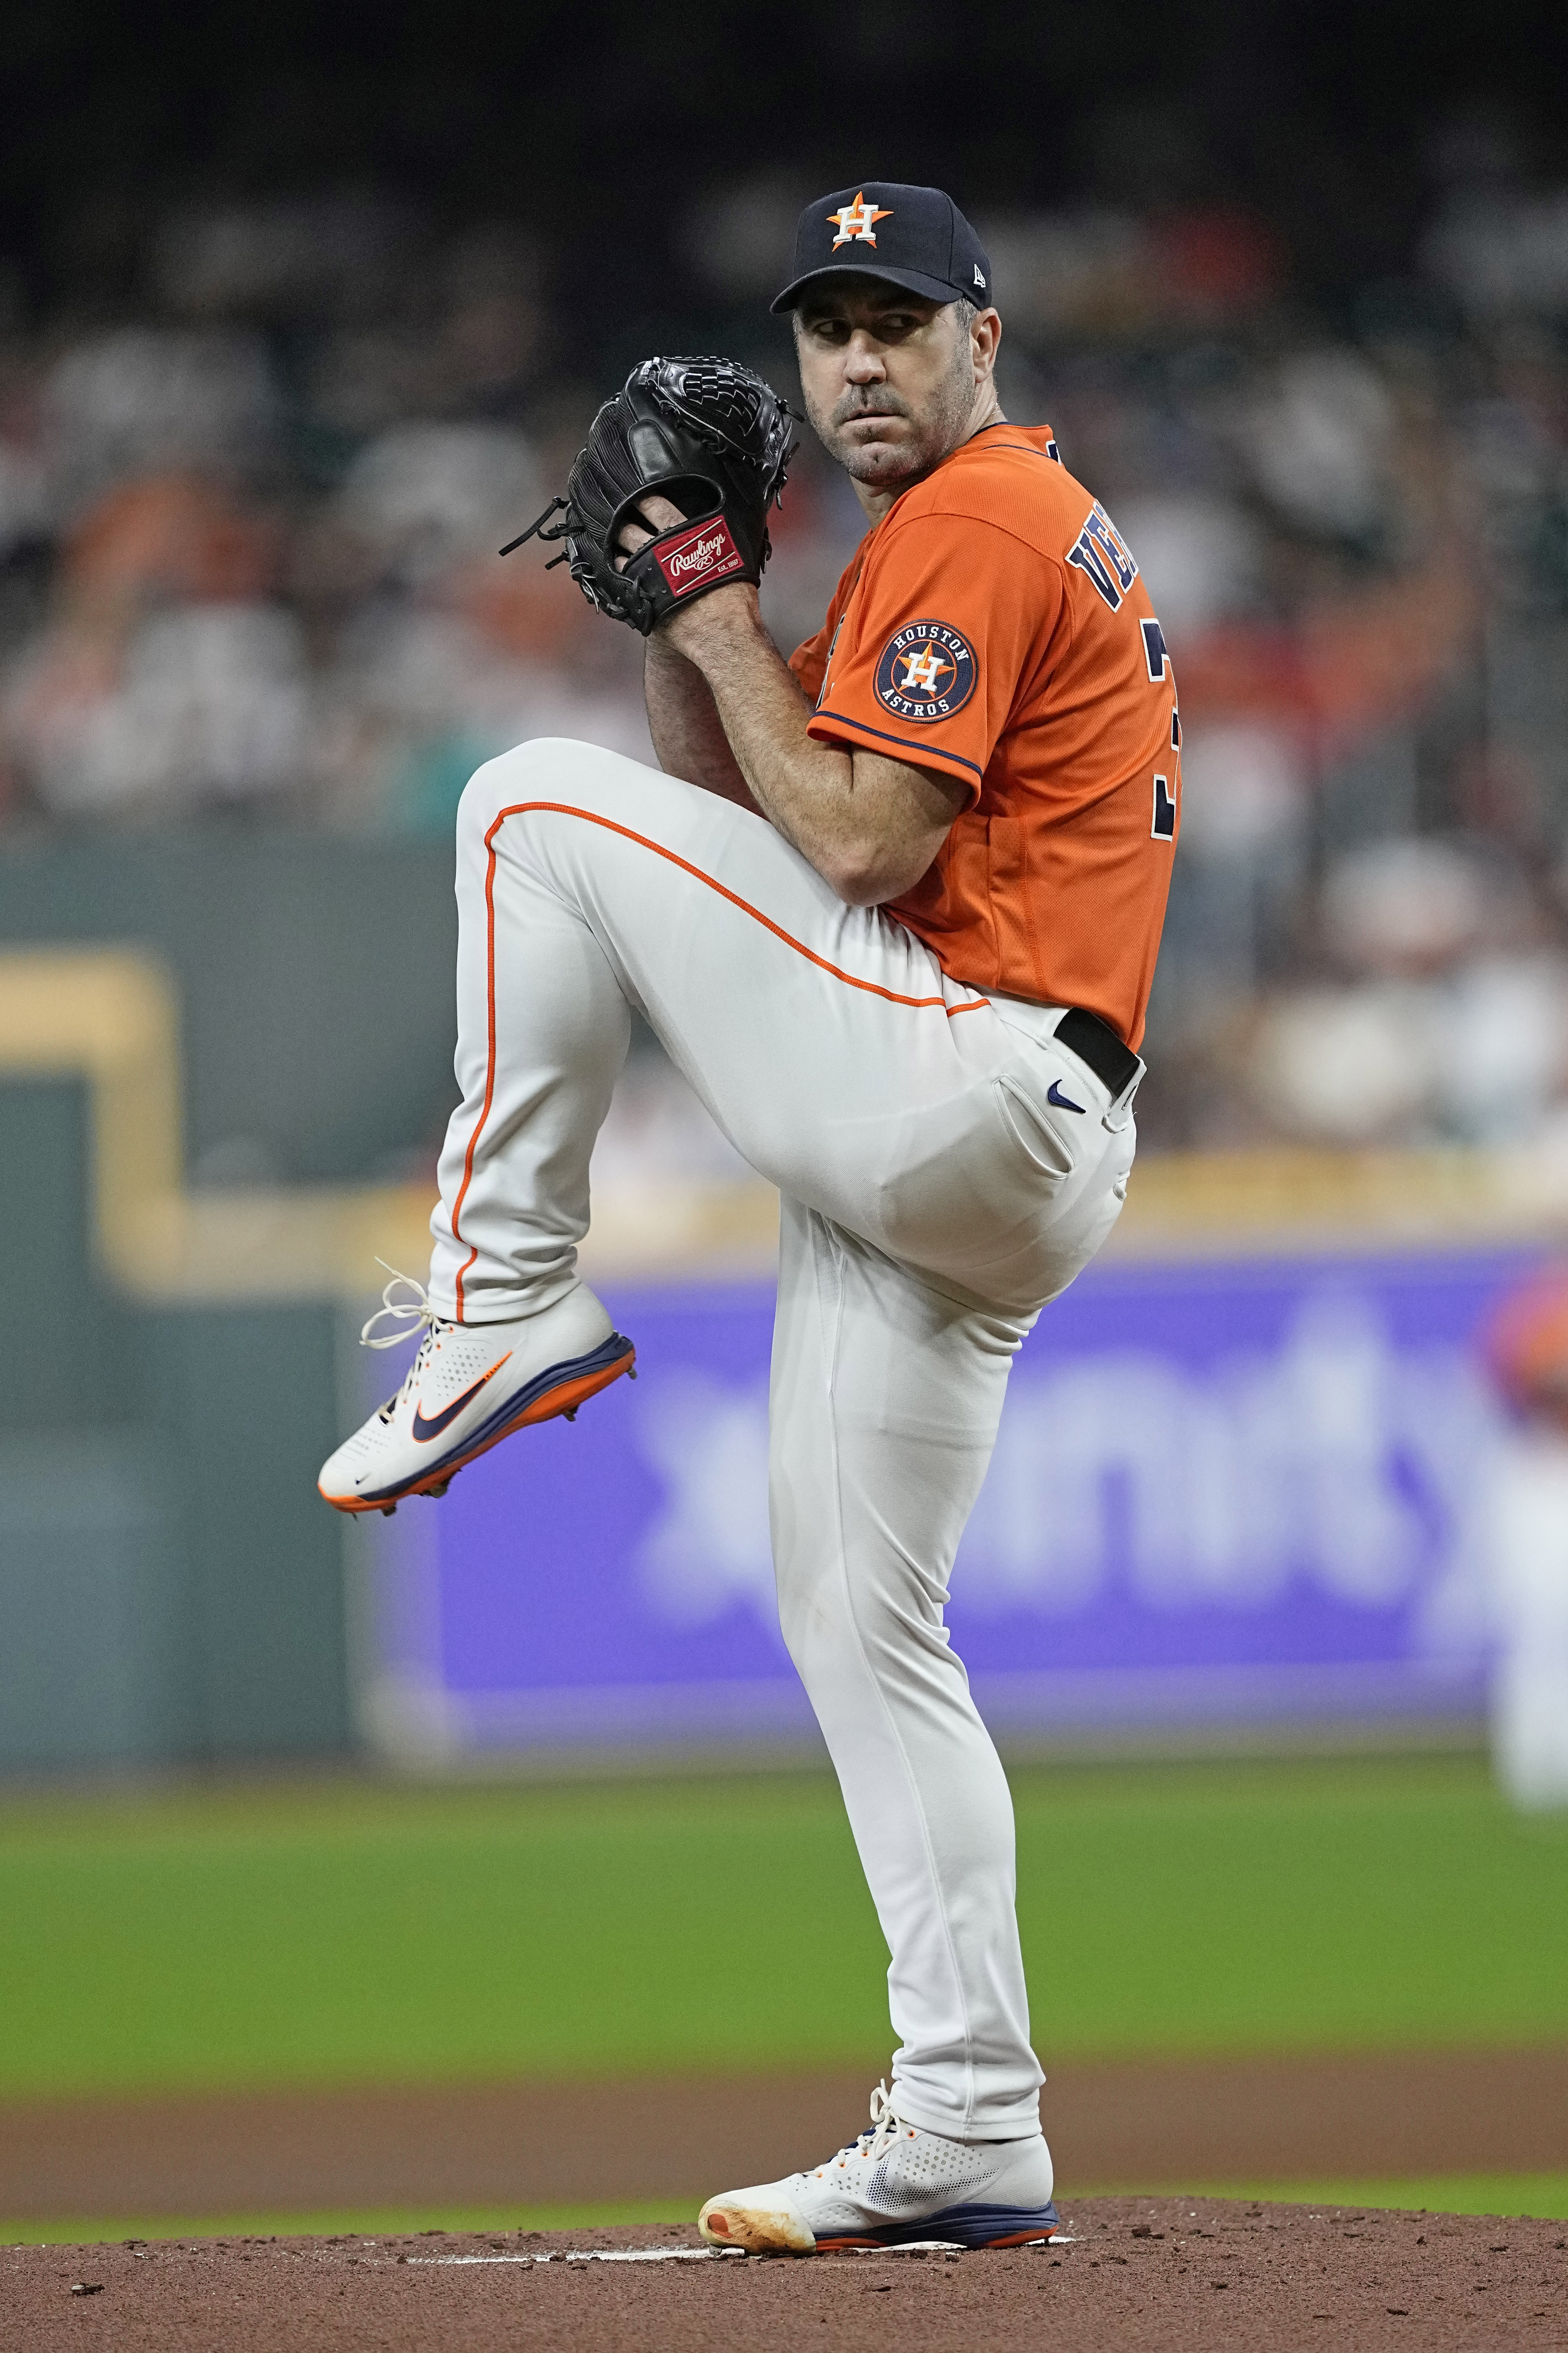 Astros on verge of playoffs after Jeremy Peña's game-saving play